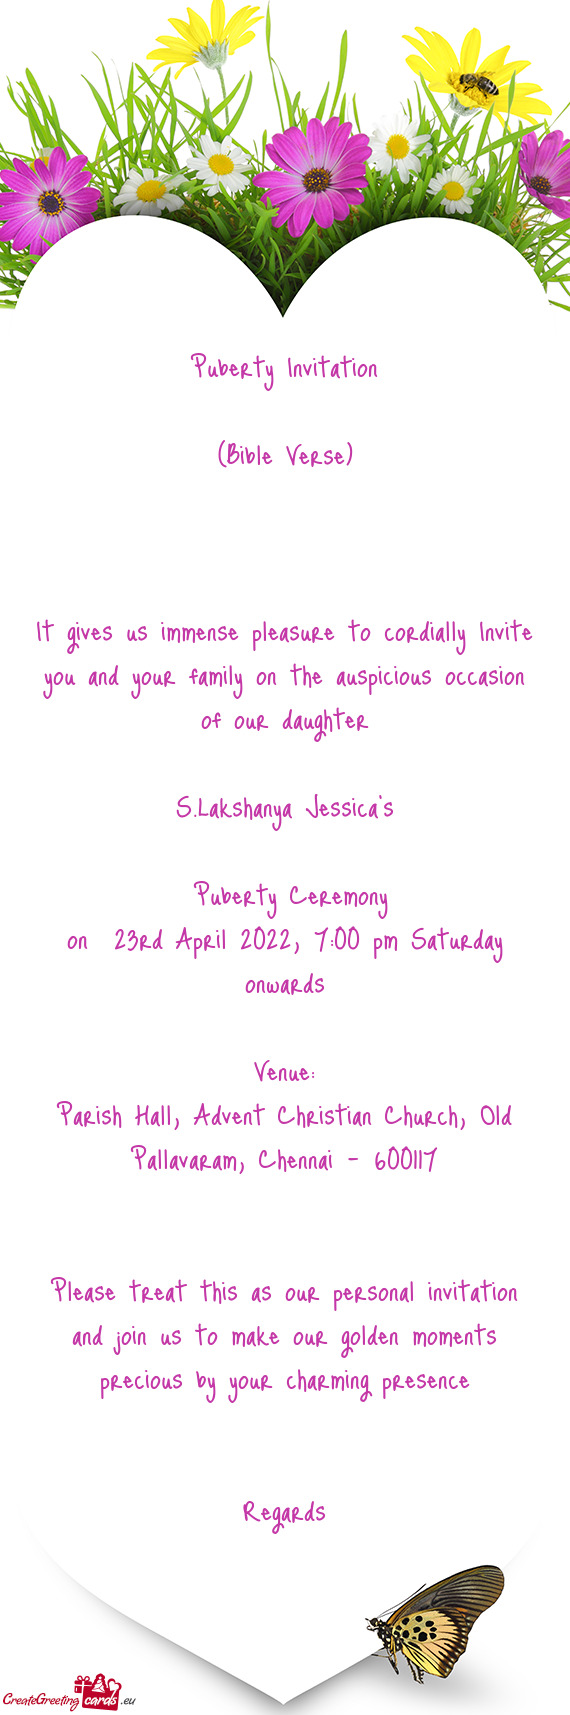 Puberty Invitation
 
 (Bible Verse)
 
 
 
 It gives us immense pleasure to cordially Invite you and